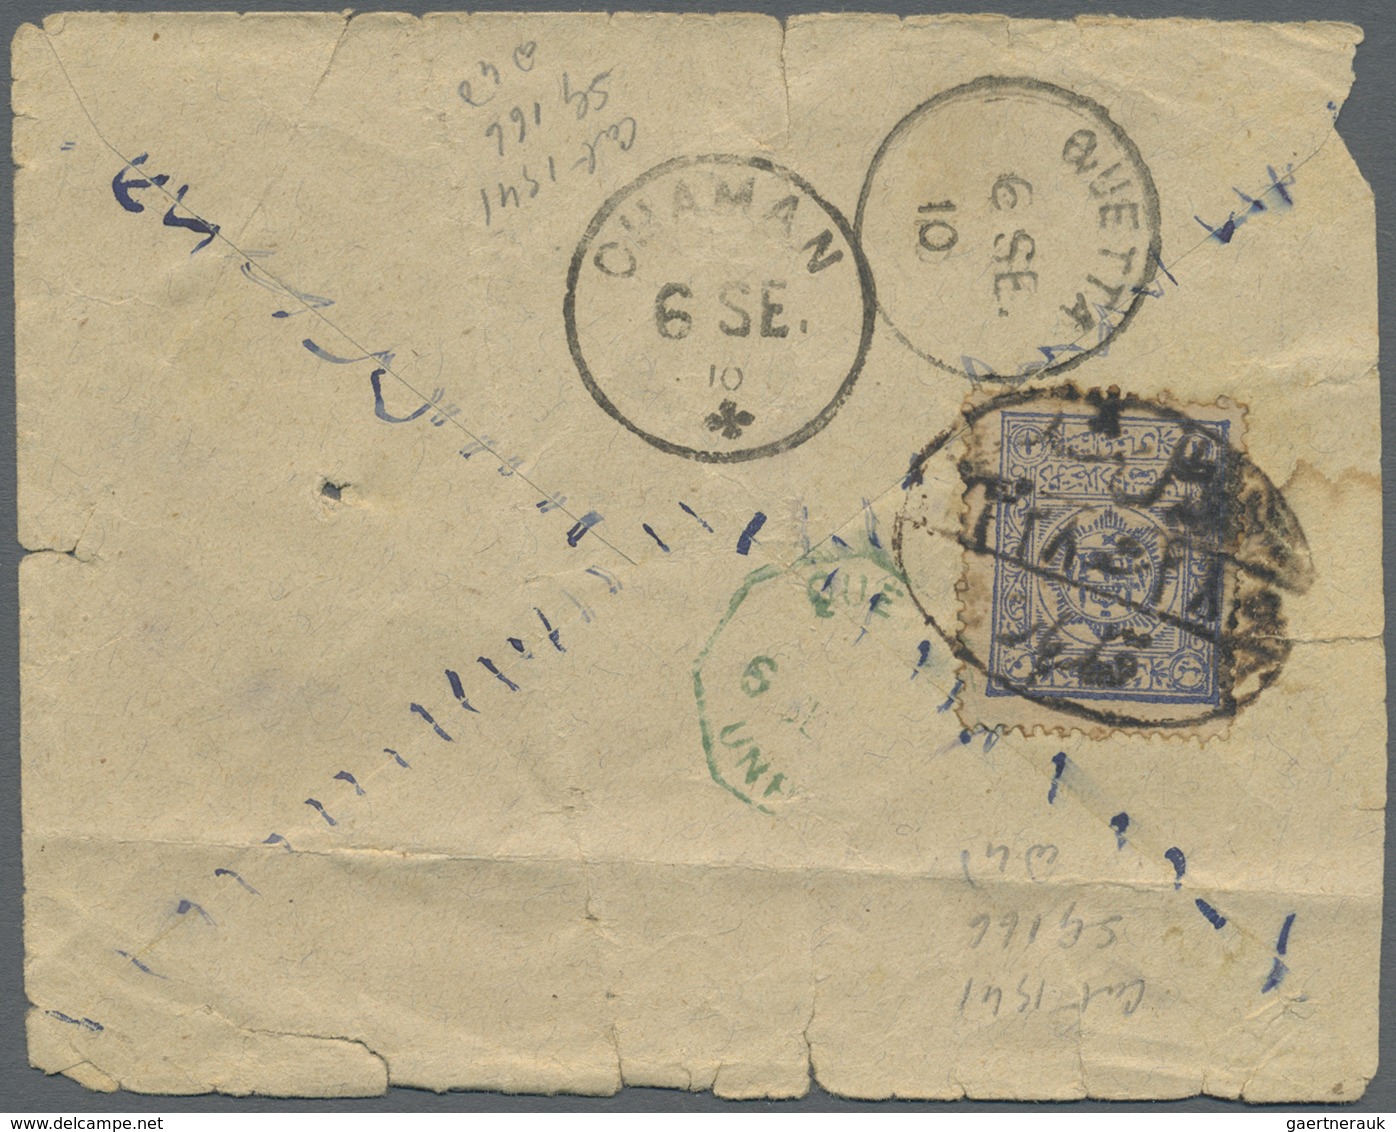 Br Afghanistan: 1909-1928: Collection of 19 pre-UPU covers to India, from the Kabul region via the nort